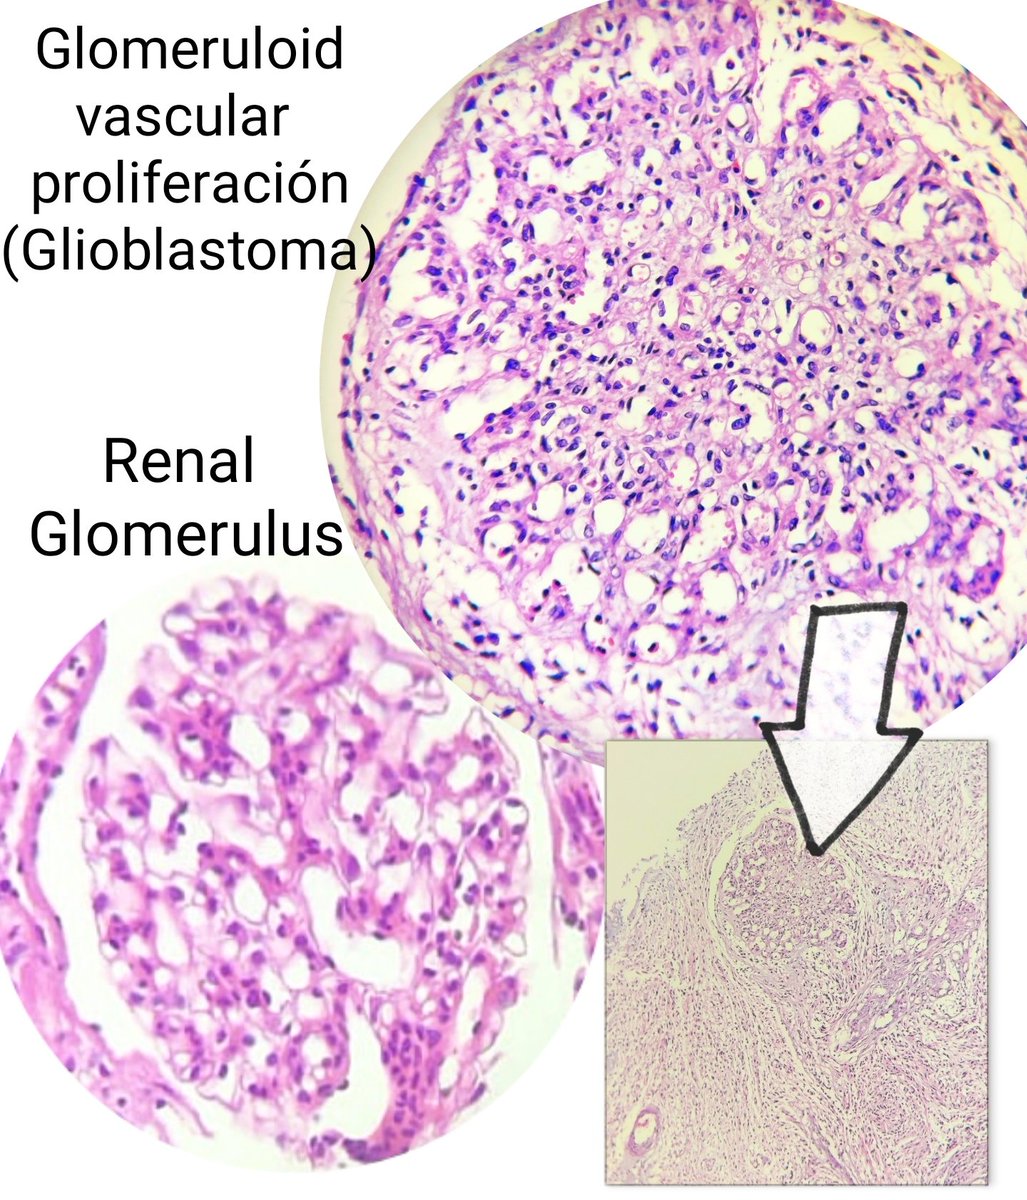 Compare and contrast between vascular proliferation of Glioblastoma and a renal Glomerulus. The most glomeruloid looking I've seen (today's case). #neuropath